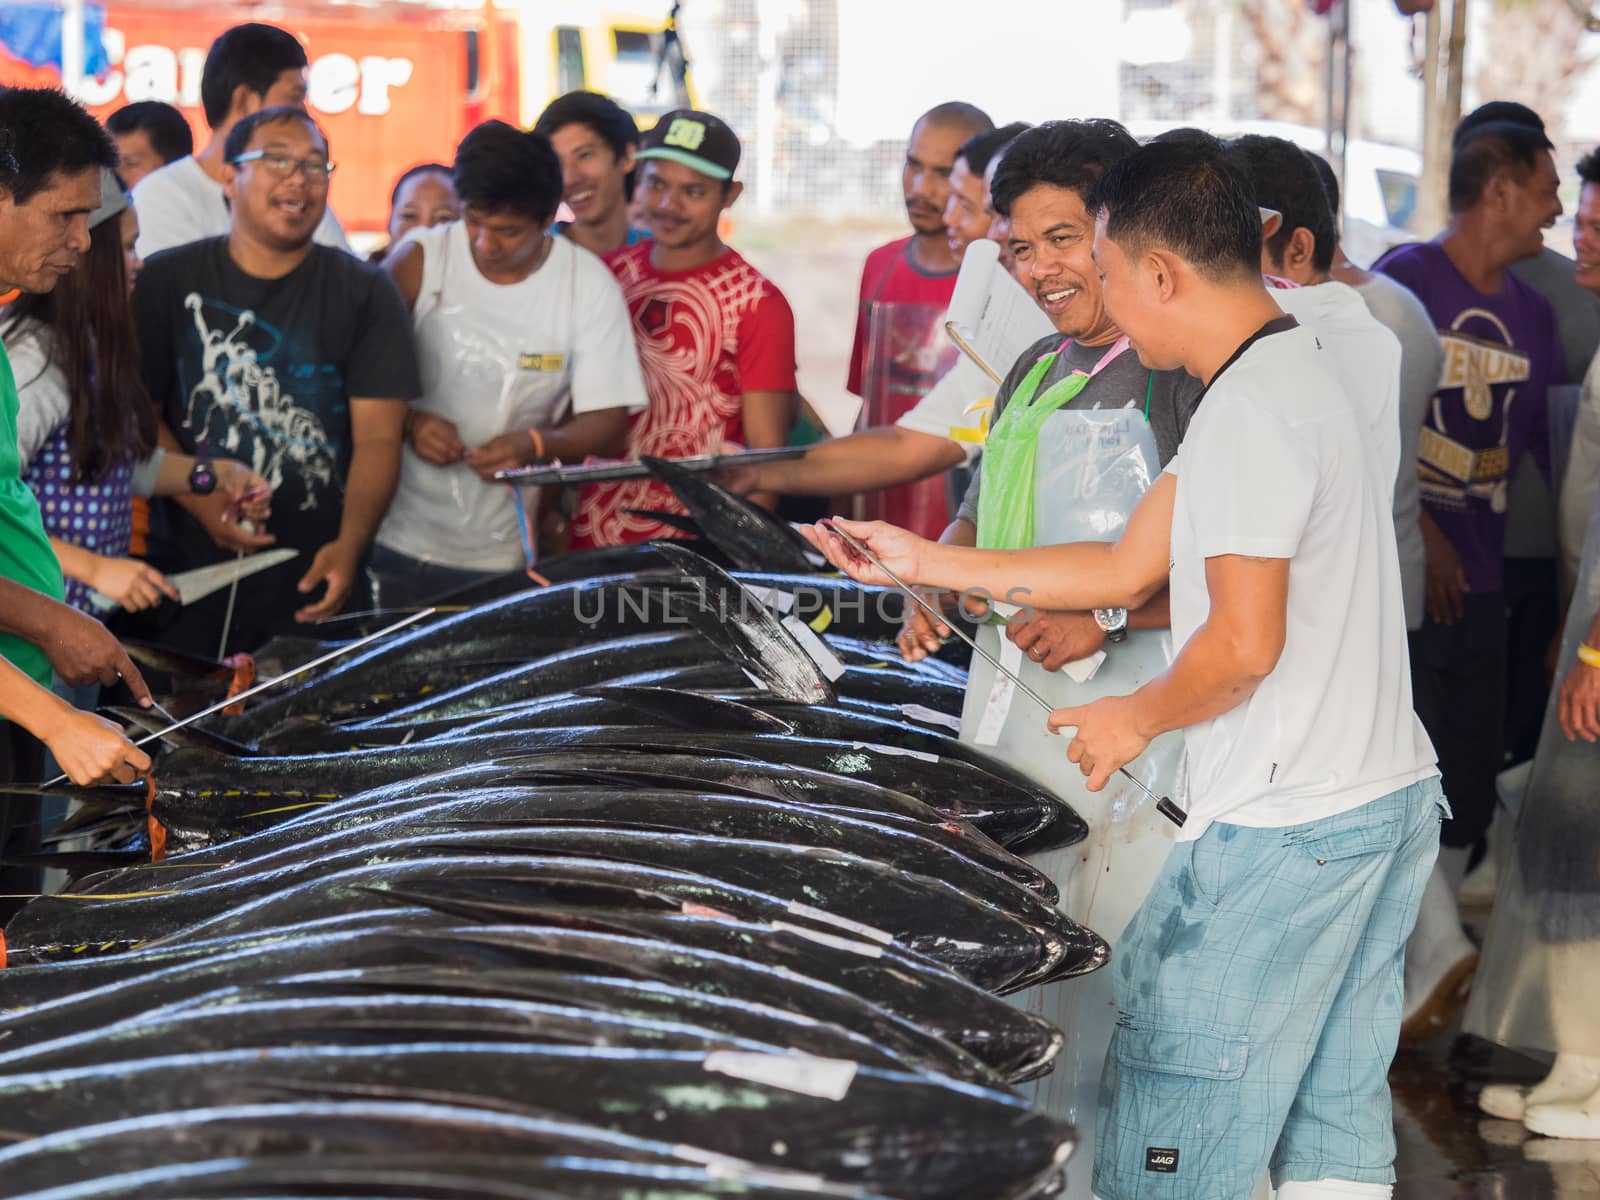 General Santos City - September 1, 2016: Buyers and sellers checking the quality of yellowfin tuna at the Tuna Harbor in General Santos City, South Cotabato, The Philippines. General Santos is the Tuna Capital of The Philippines, and the tuna industry is an important contributor the the city’s economy with export worldwide.